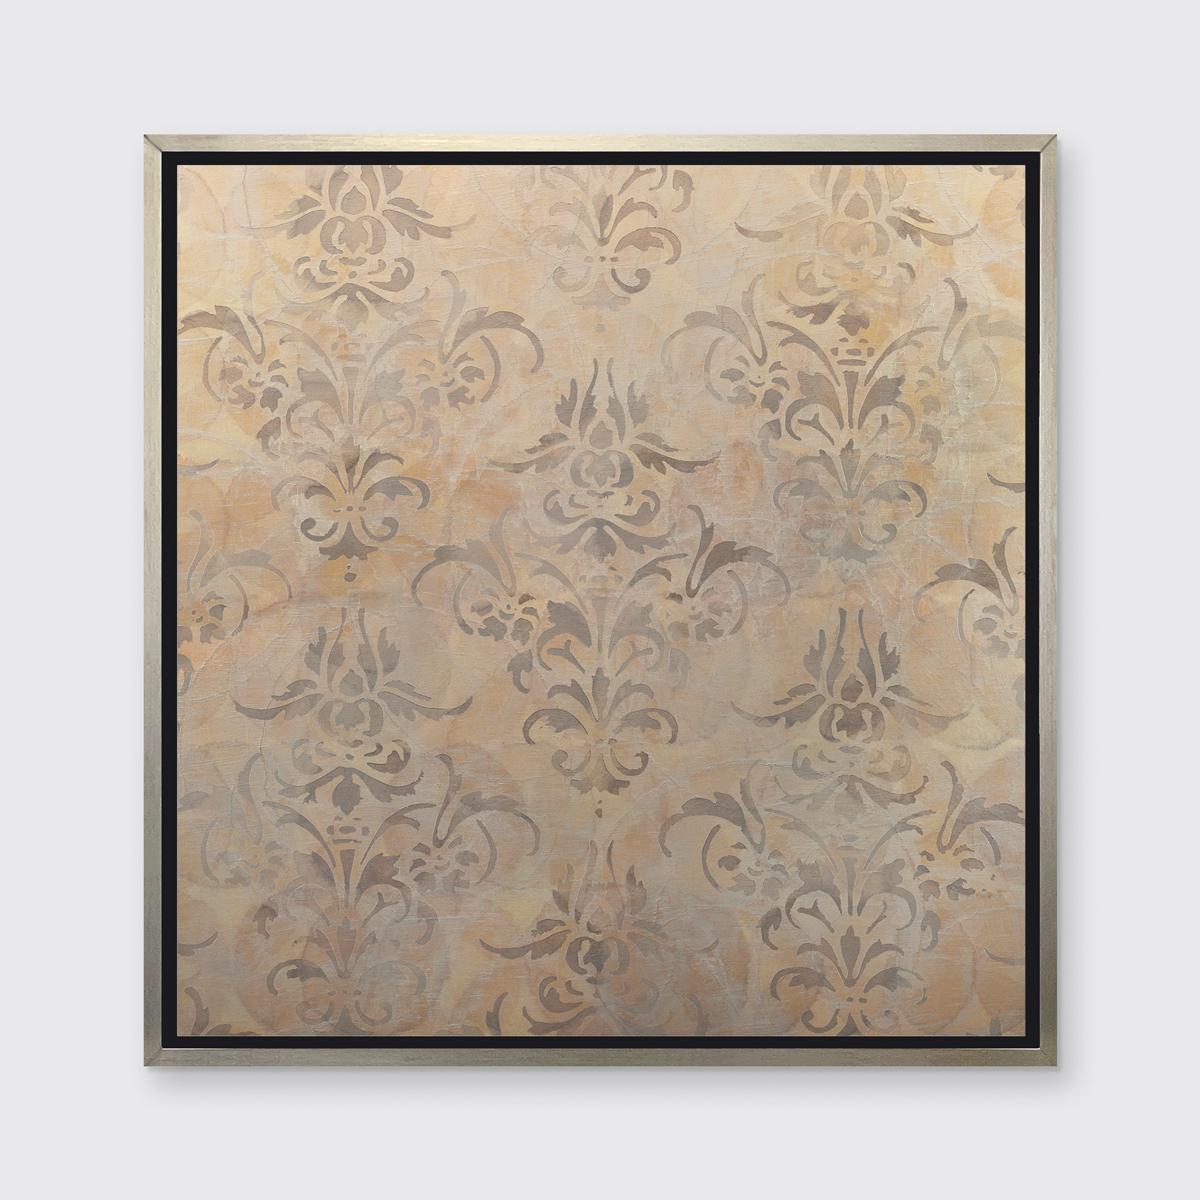 This abstract limited edition print by Roger Mudre is inspired by his recent trip to the Northern Italian city. In it, Mudre weaves his exploration of the circle together with a geometric floral pattern reminiscent of Venician Fortuny Fabrics. Each